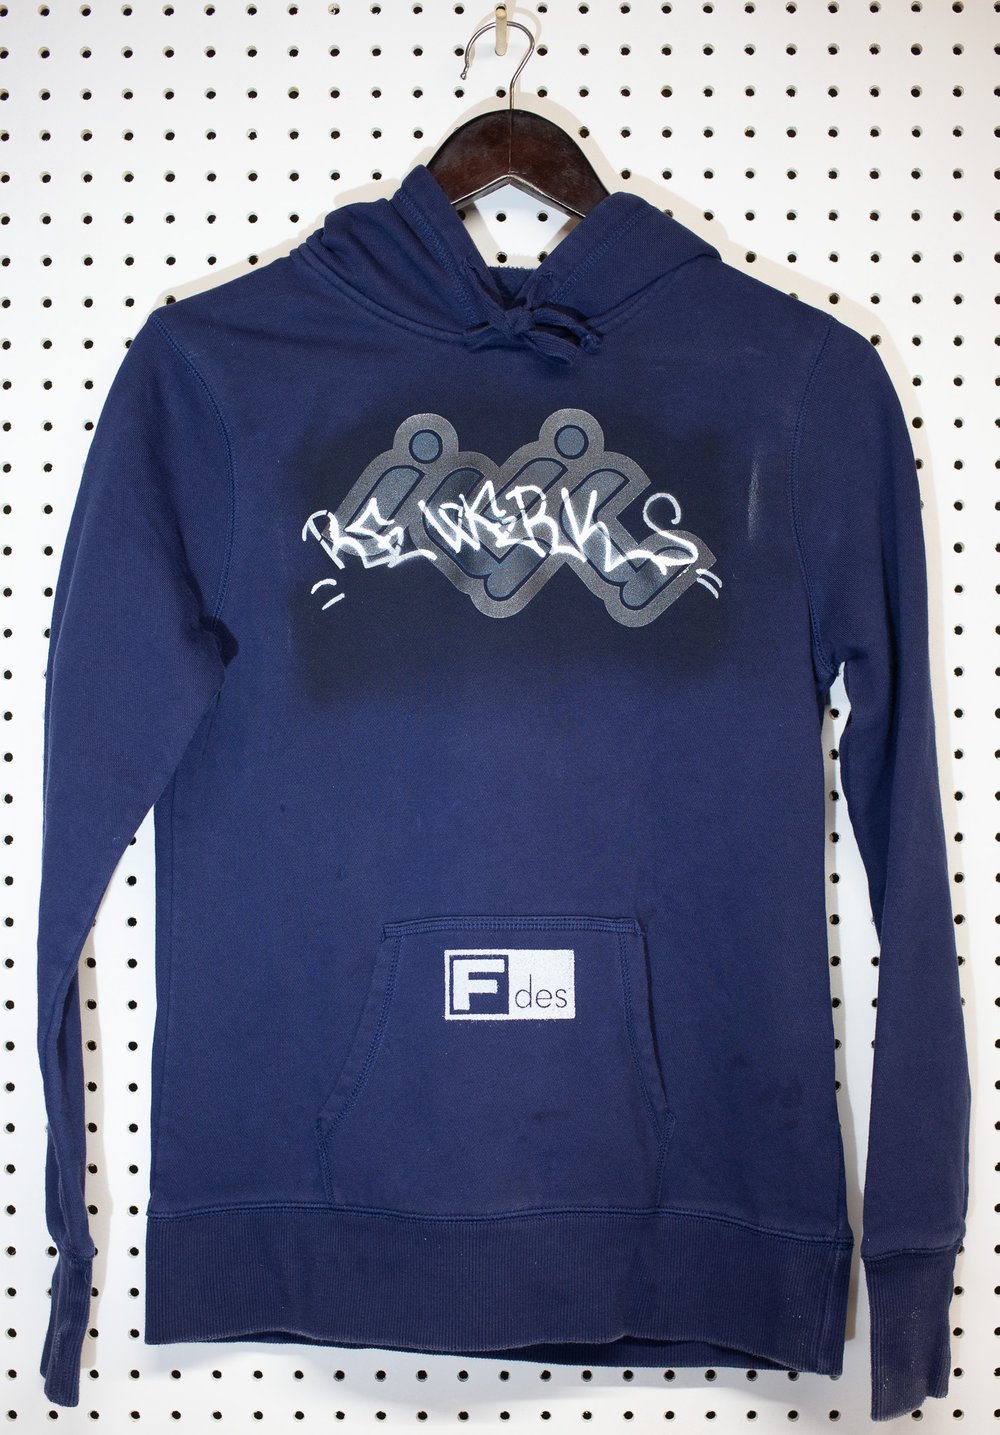 Defend the Forest x Rewerks Navy Hoodie